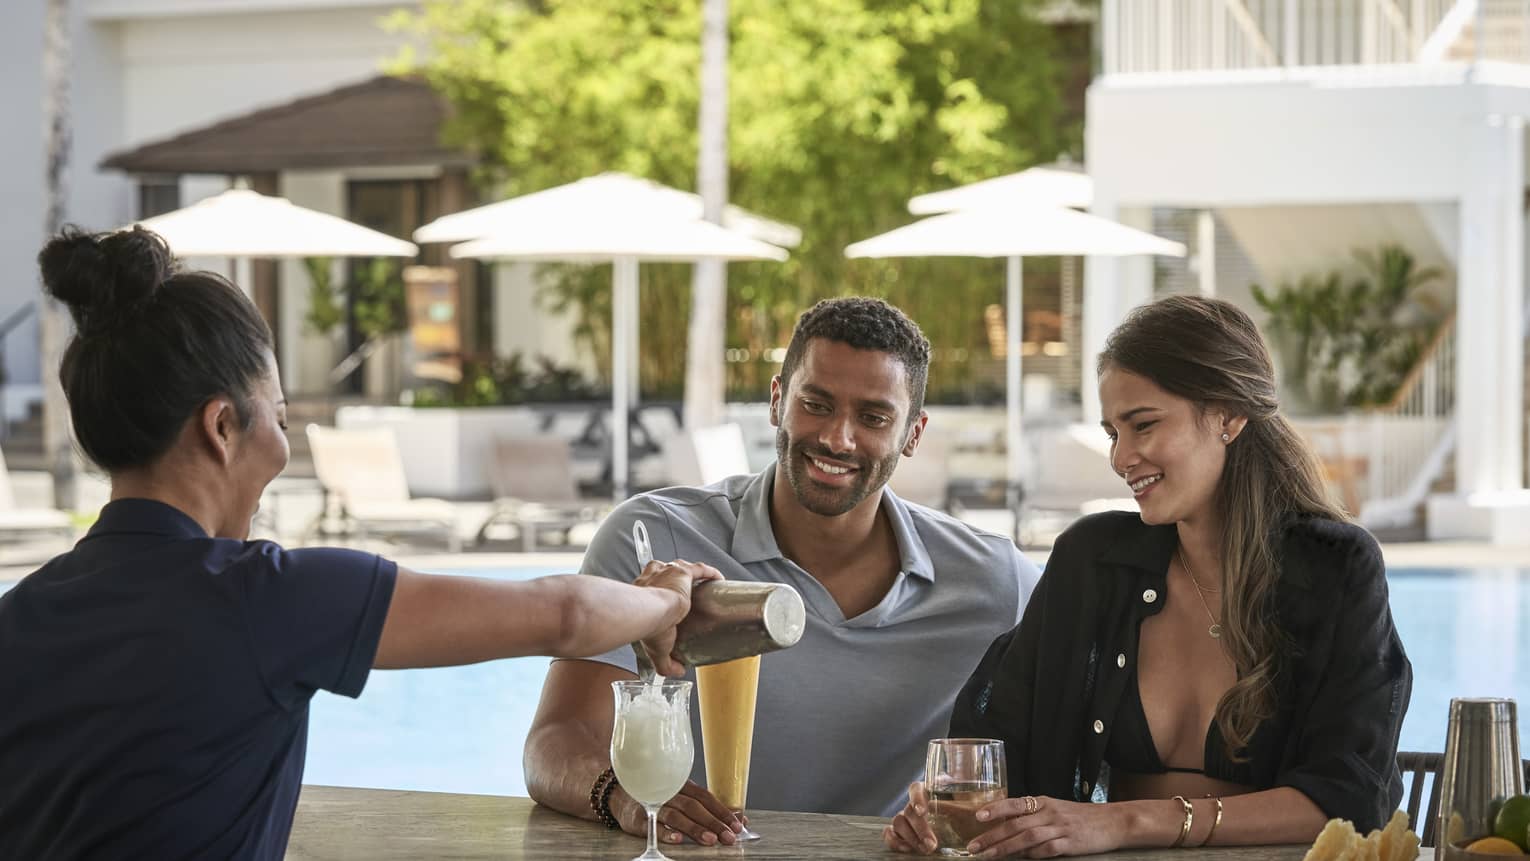 Female bartender pours a tropical drink for man and woman at poolside bar